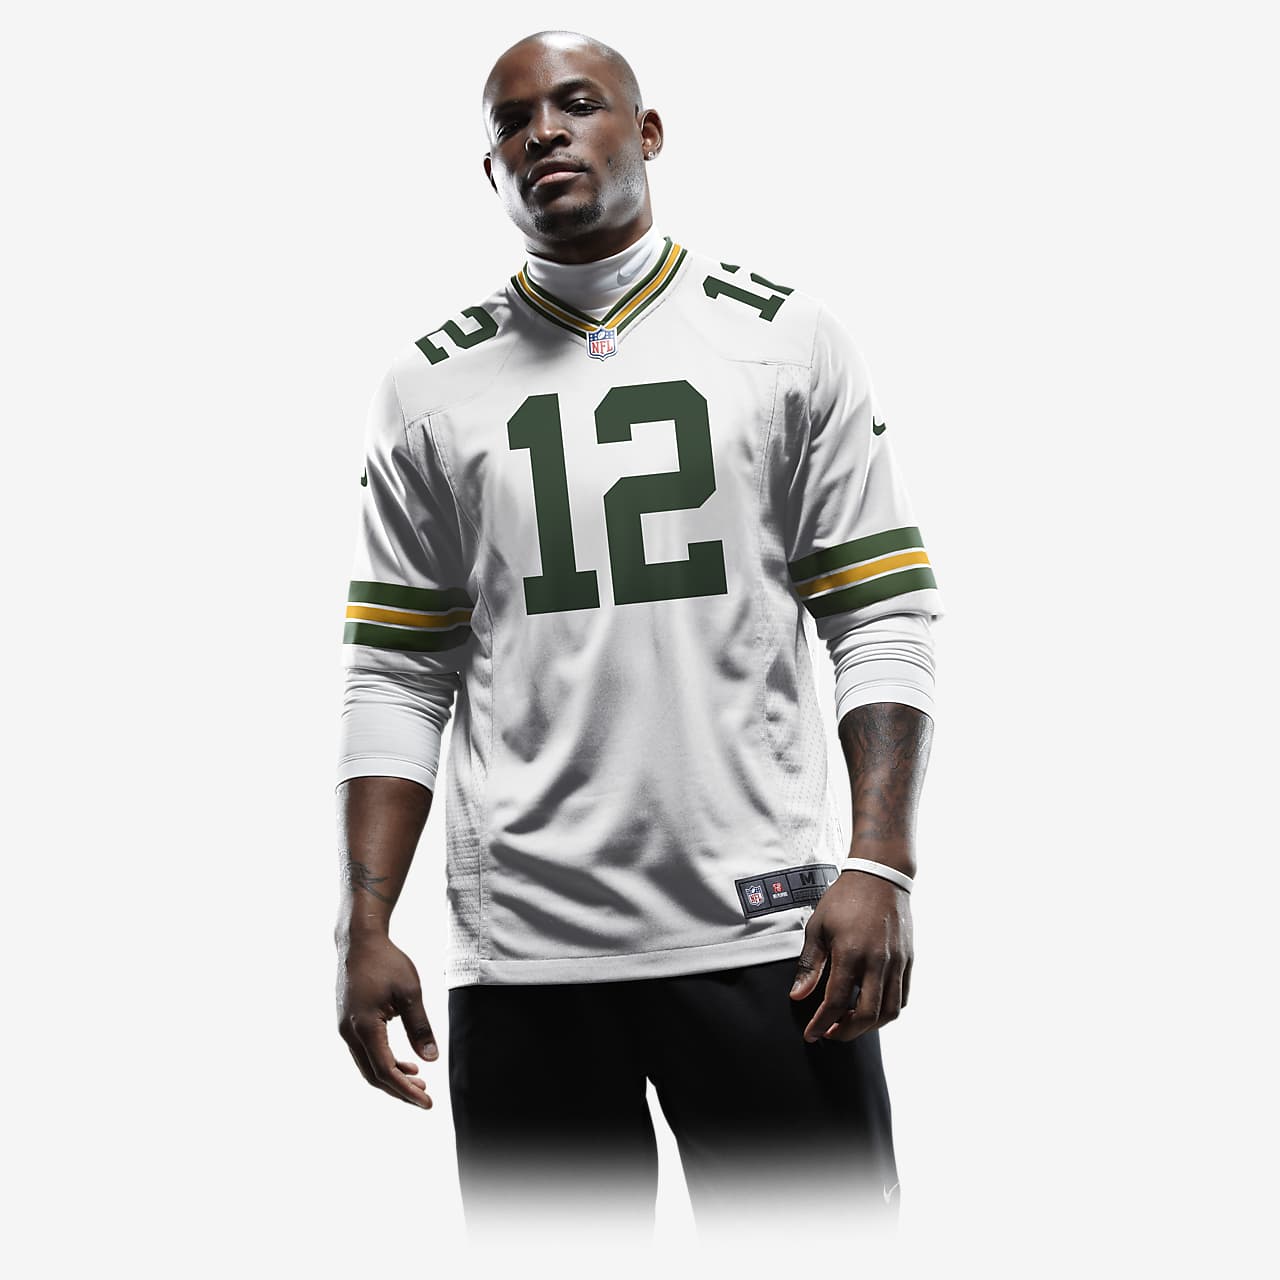 green bay aaron rodgers jersey